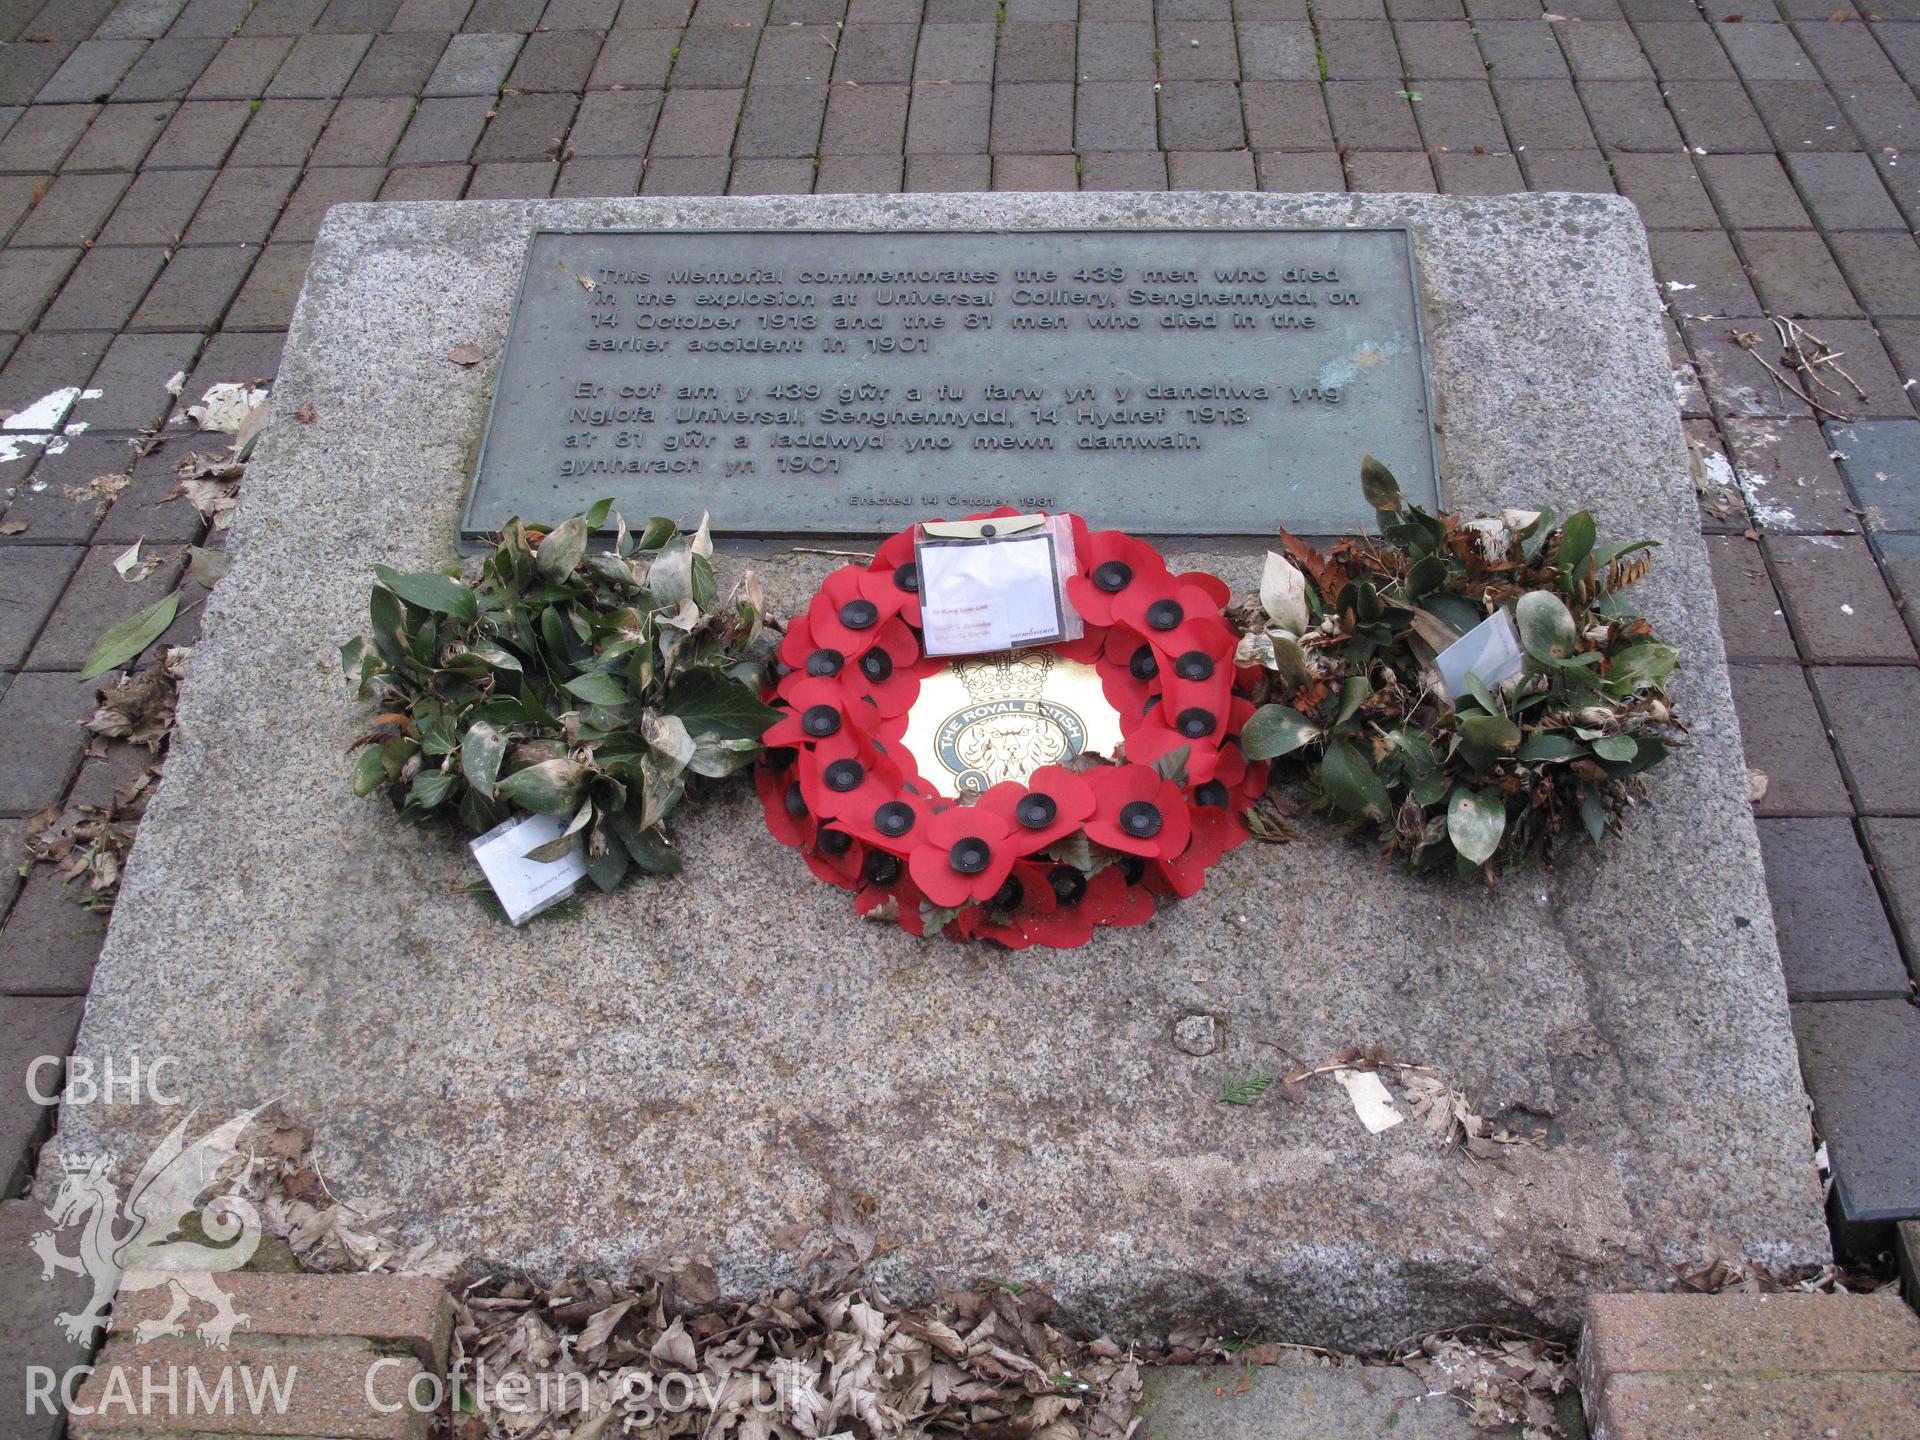 Plaque at Universal Colliery Memorial, Senghenydd, taken by Brian Malaws on 12 February 2010.